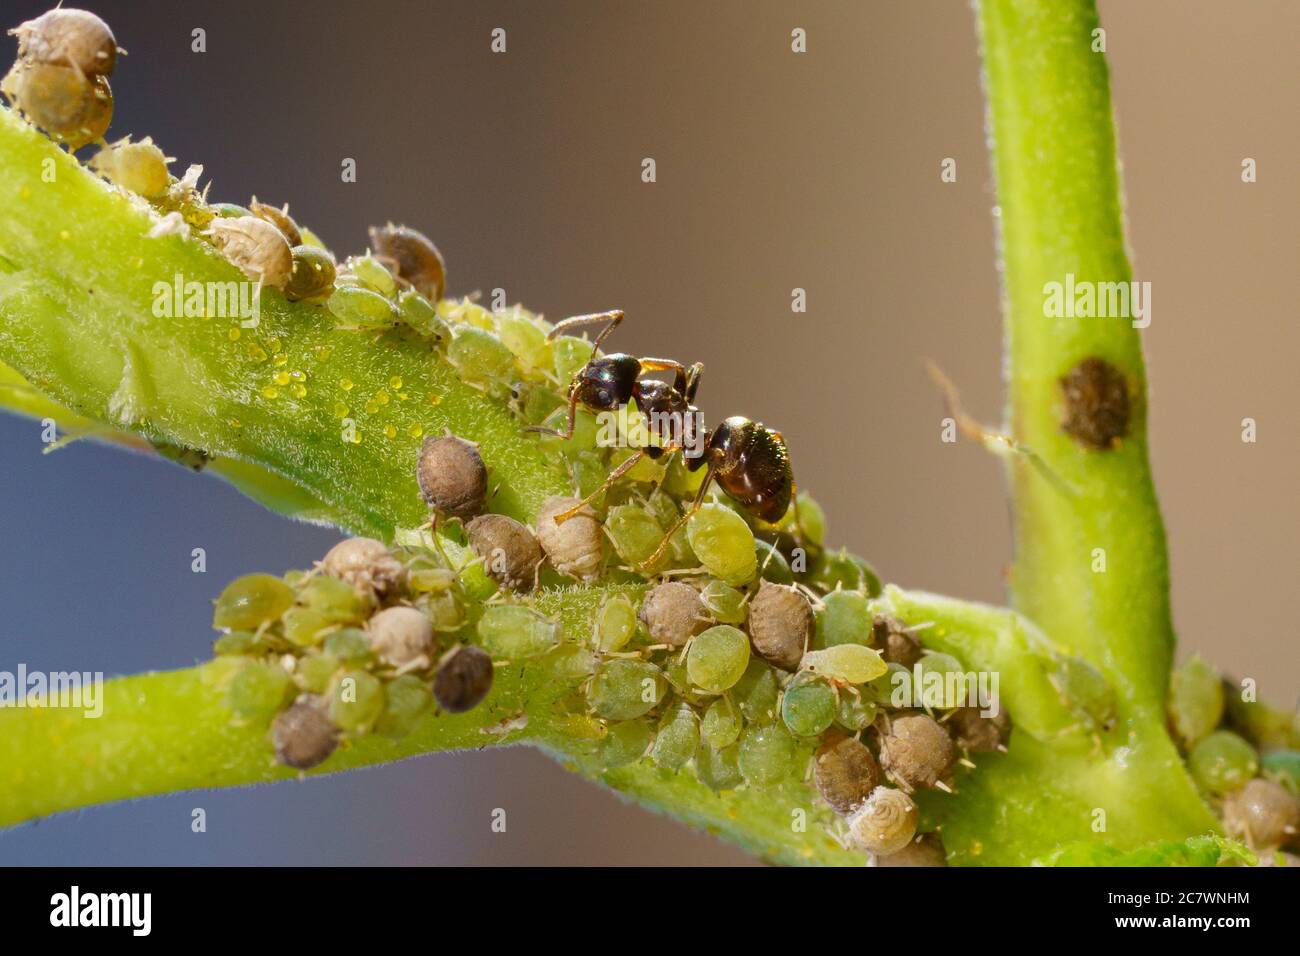 https://c8.alamy.com/comp/2C7WNHM/colony-of-aphids-and-ants-on-garden-plants-2C7WNHM.jpg